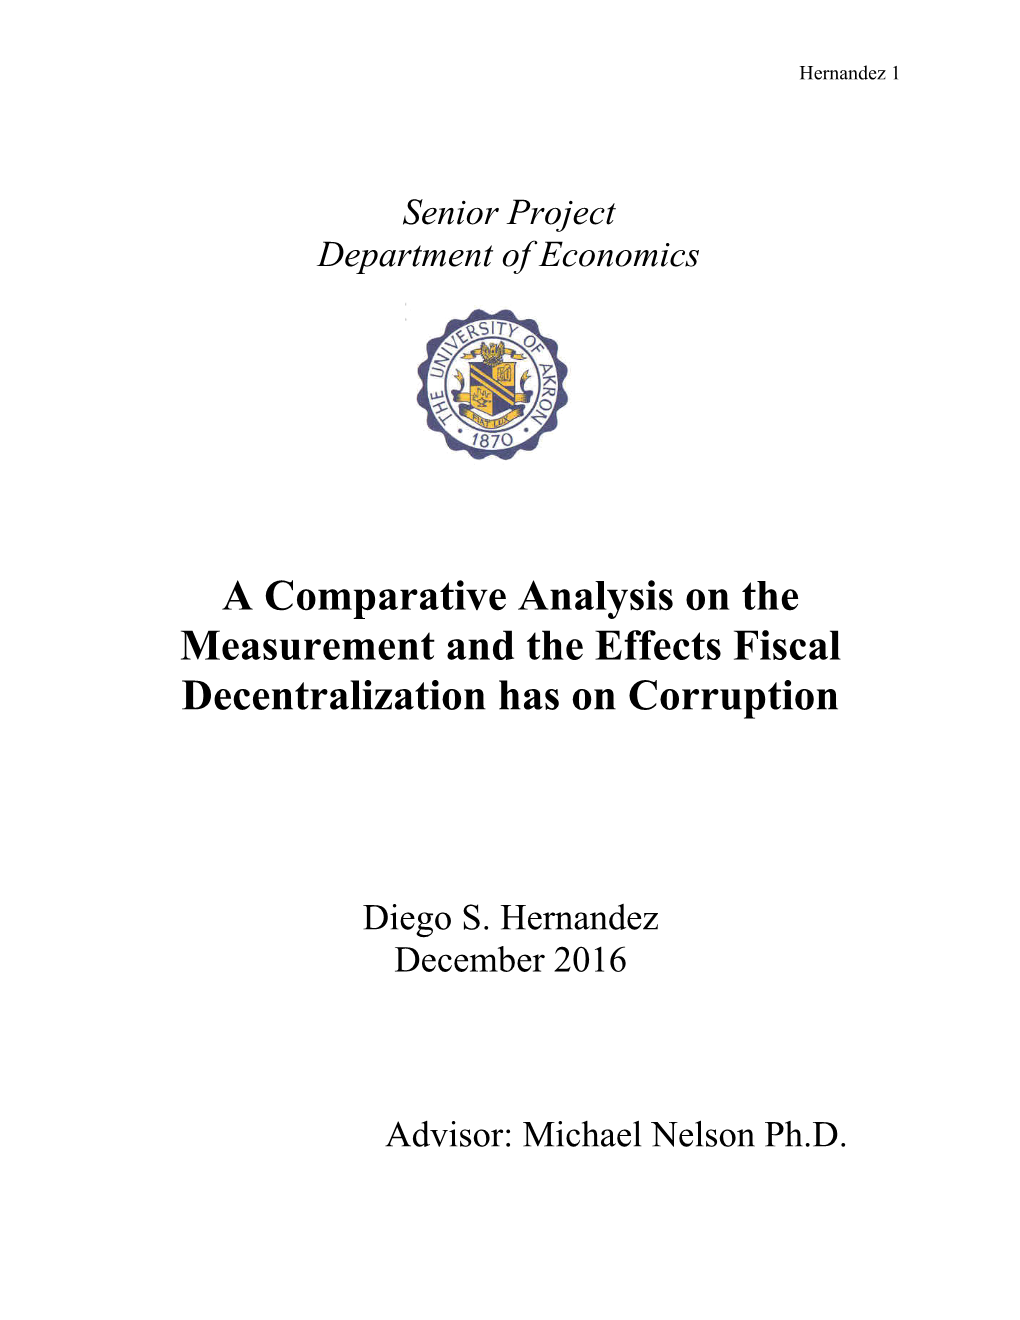 A Comparative Analysis on the Measurement and the Effects Fiscal Decentralization Has